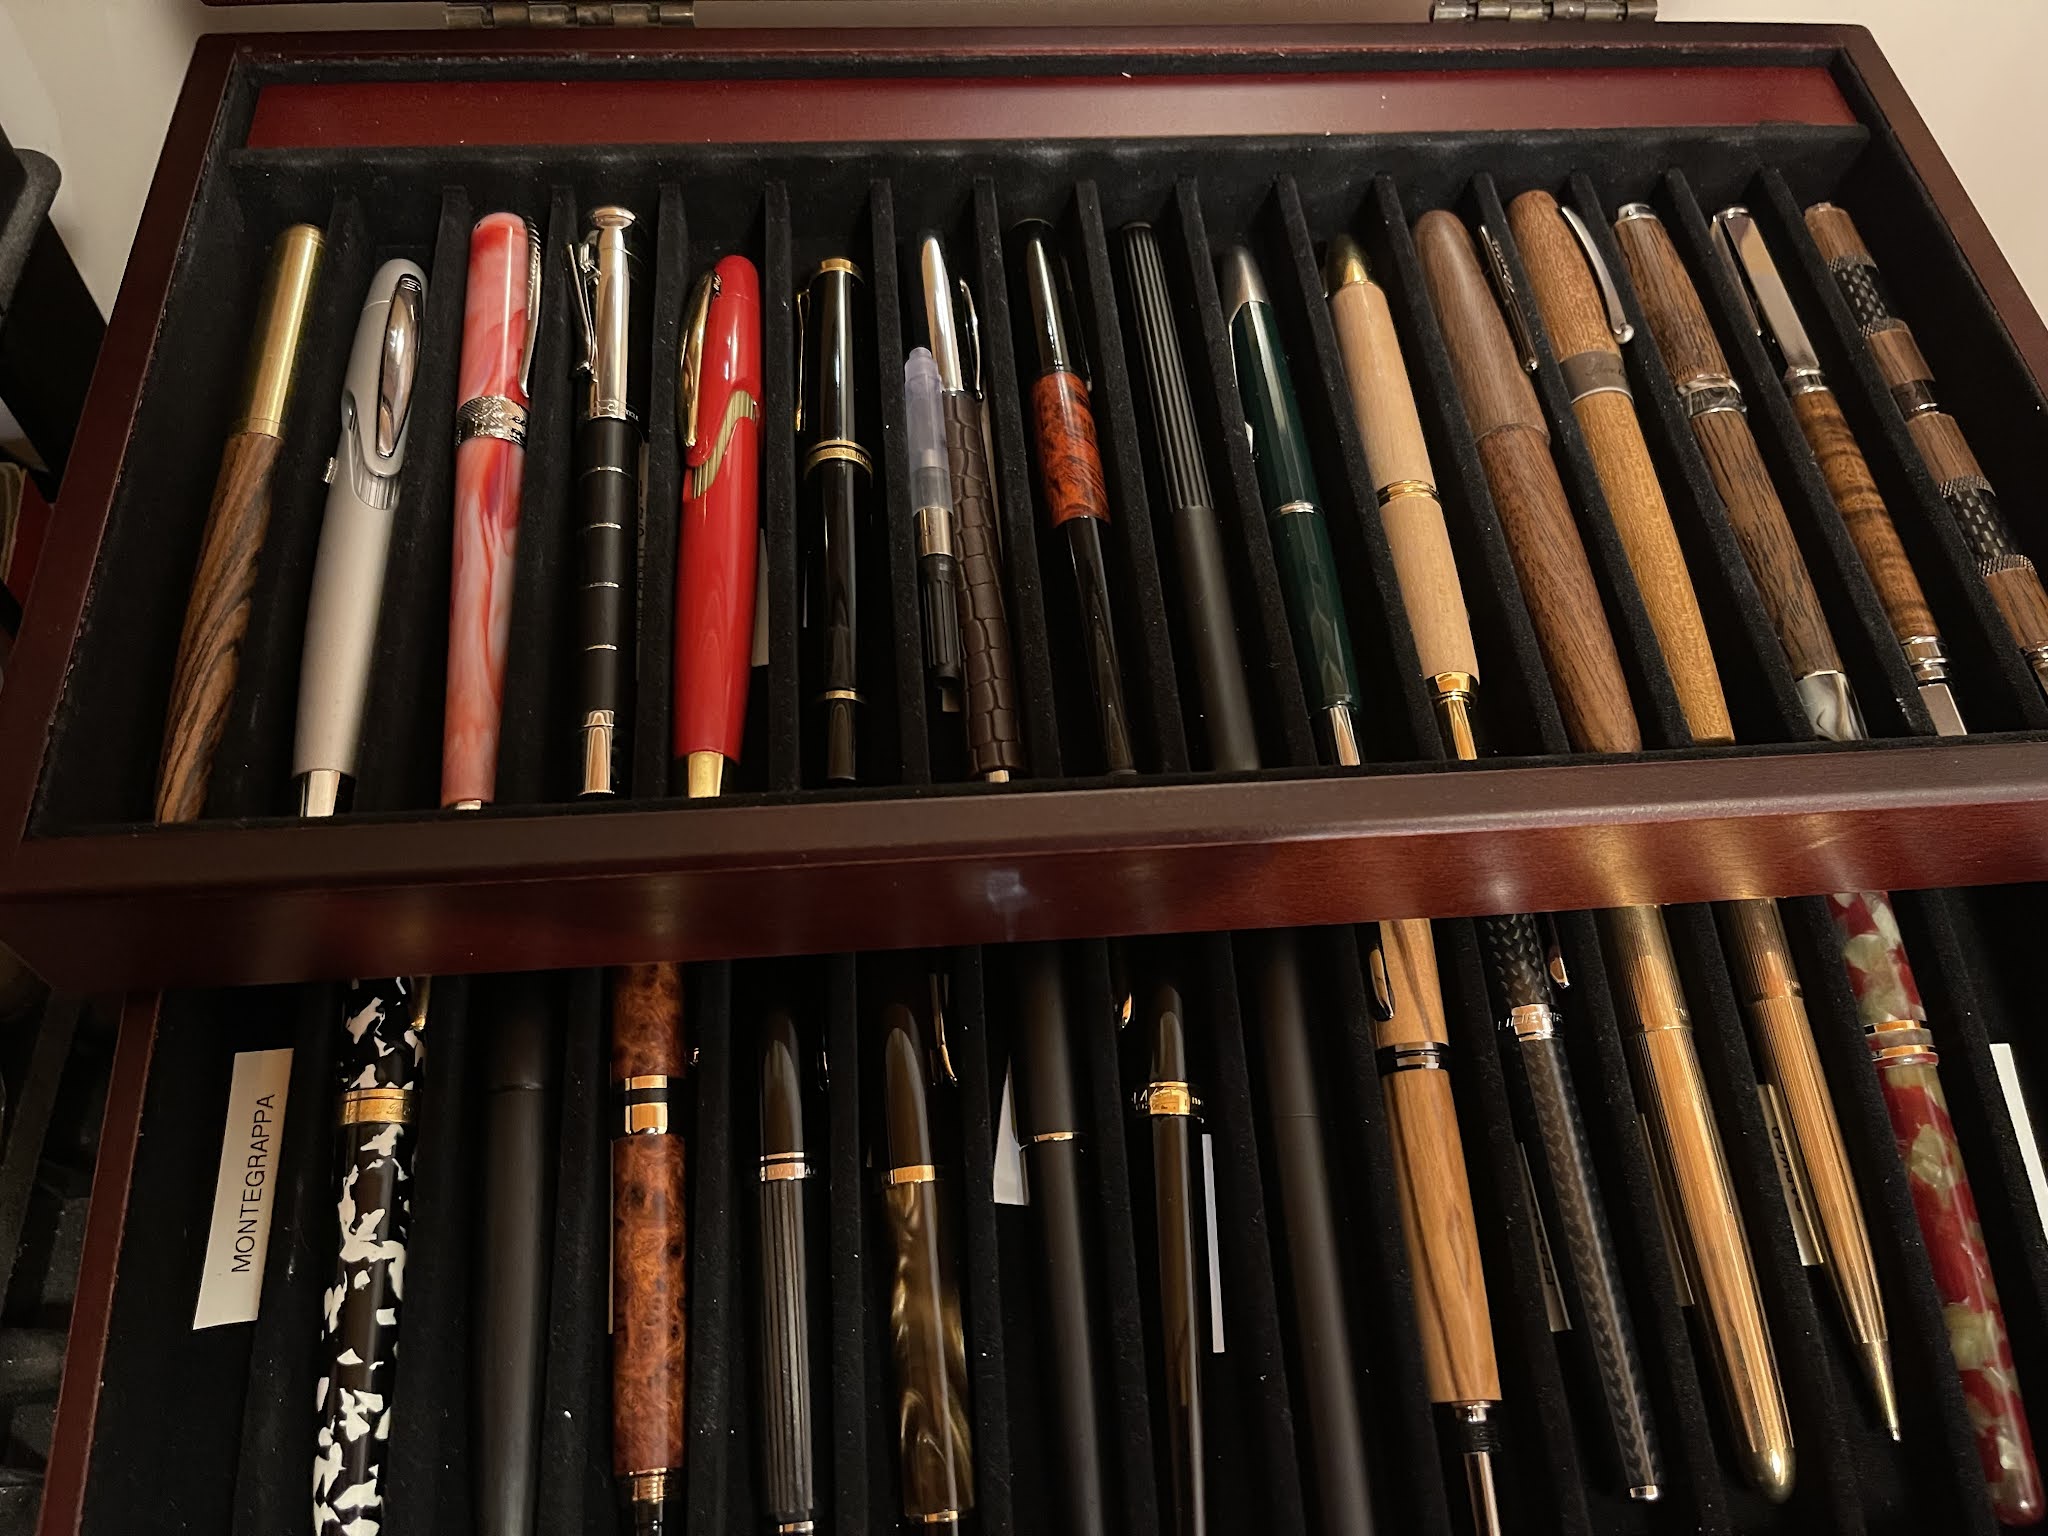 Missives from the Art World: Pens With Customer Service